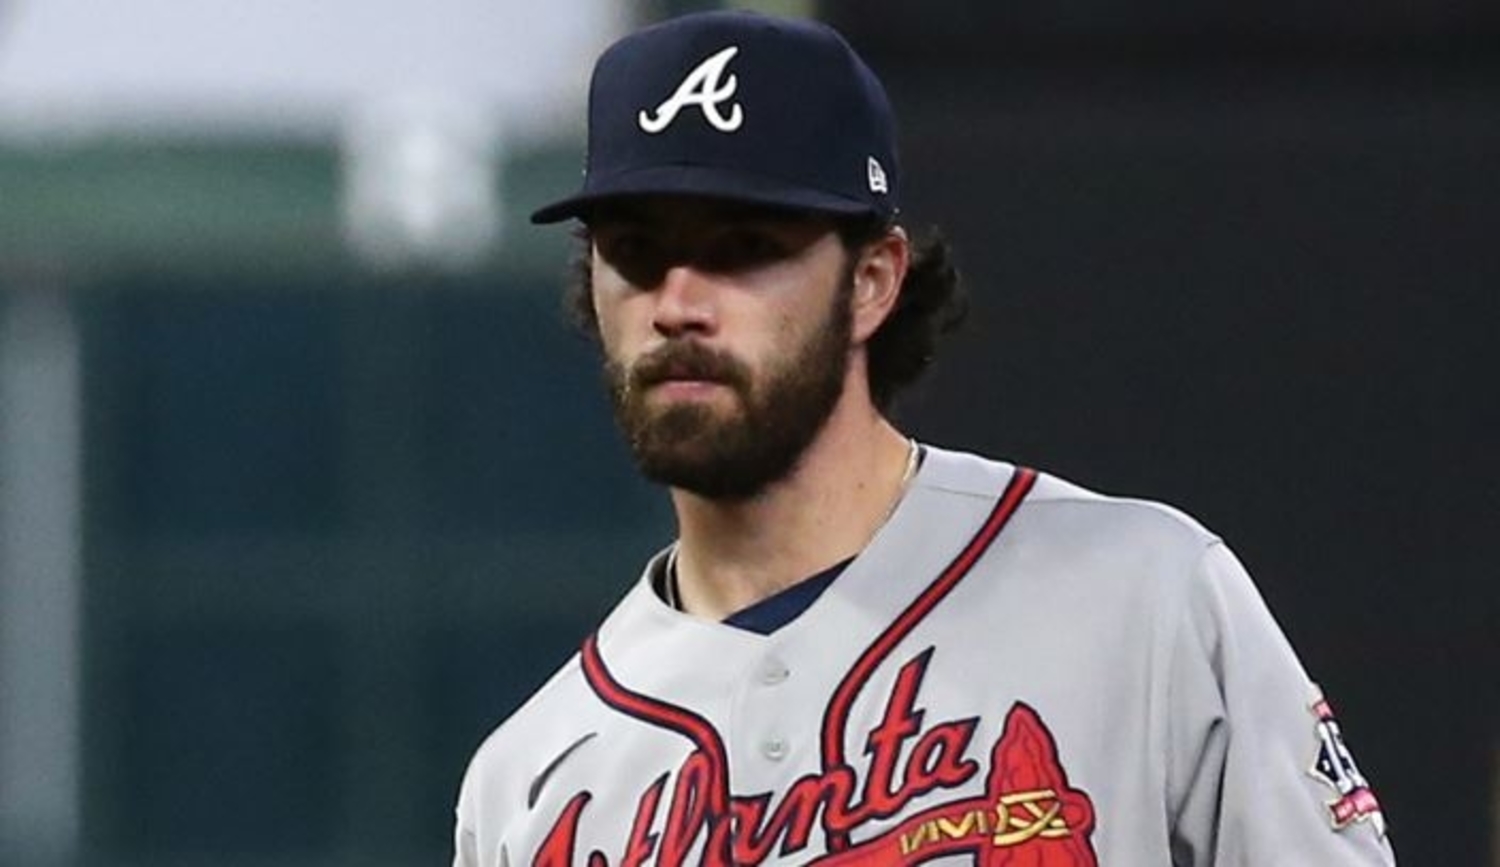 Colorado's Mallory Pugh takes on Braves' Dansby Swanson to see who's the  better athlete